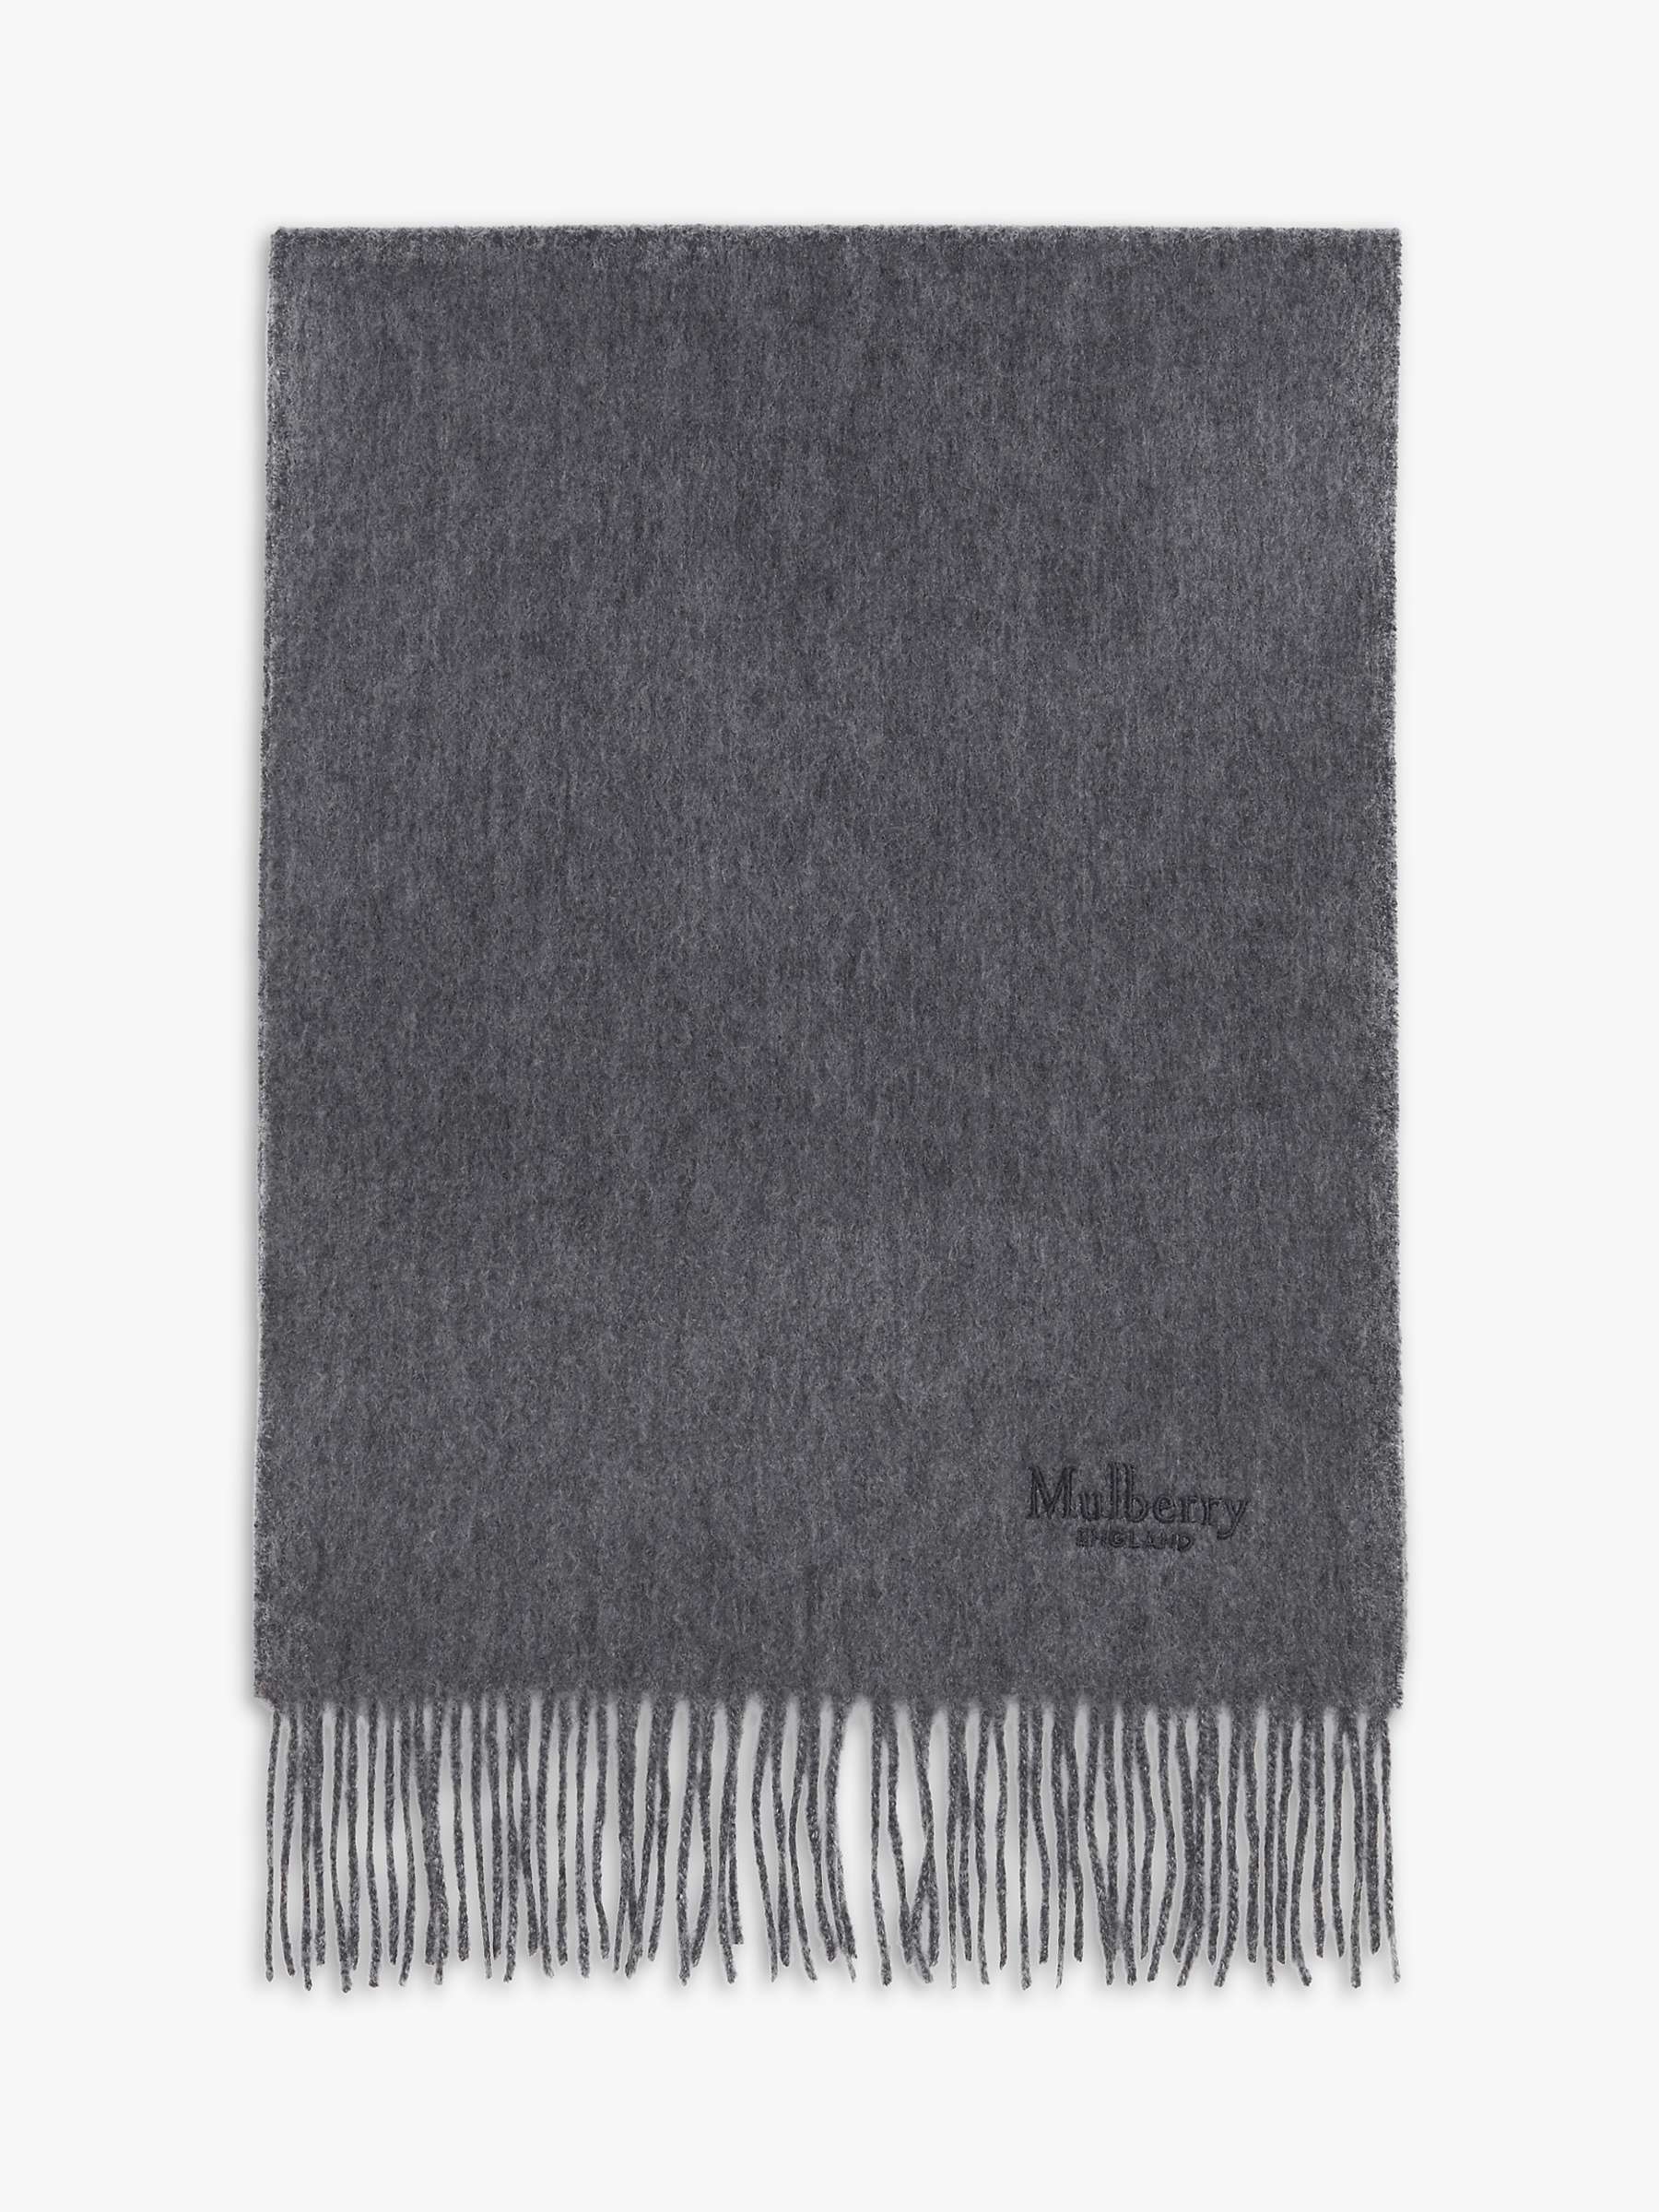 Buy Mulberry Cashmere Scarf Online at johnlewis.com